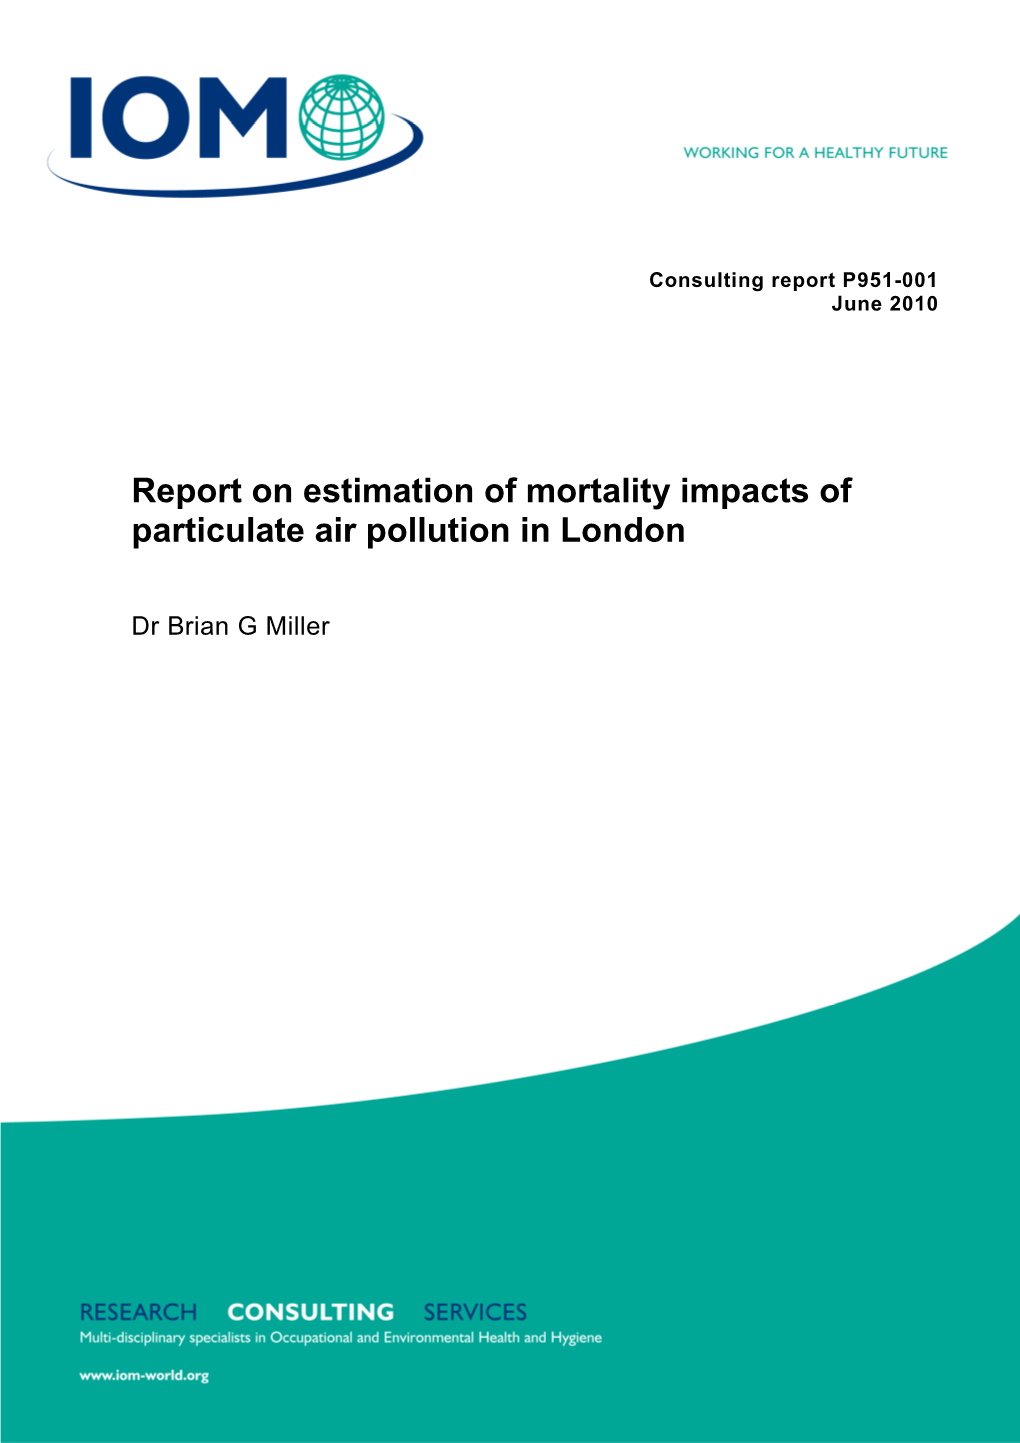 Report on Estimation of Mortality Impacts of Particulate Air Pollution in London